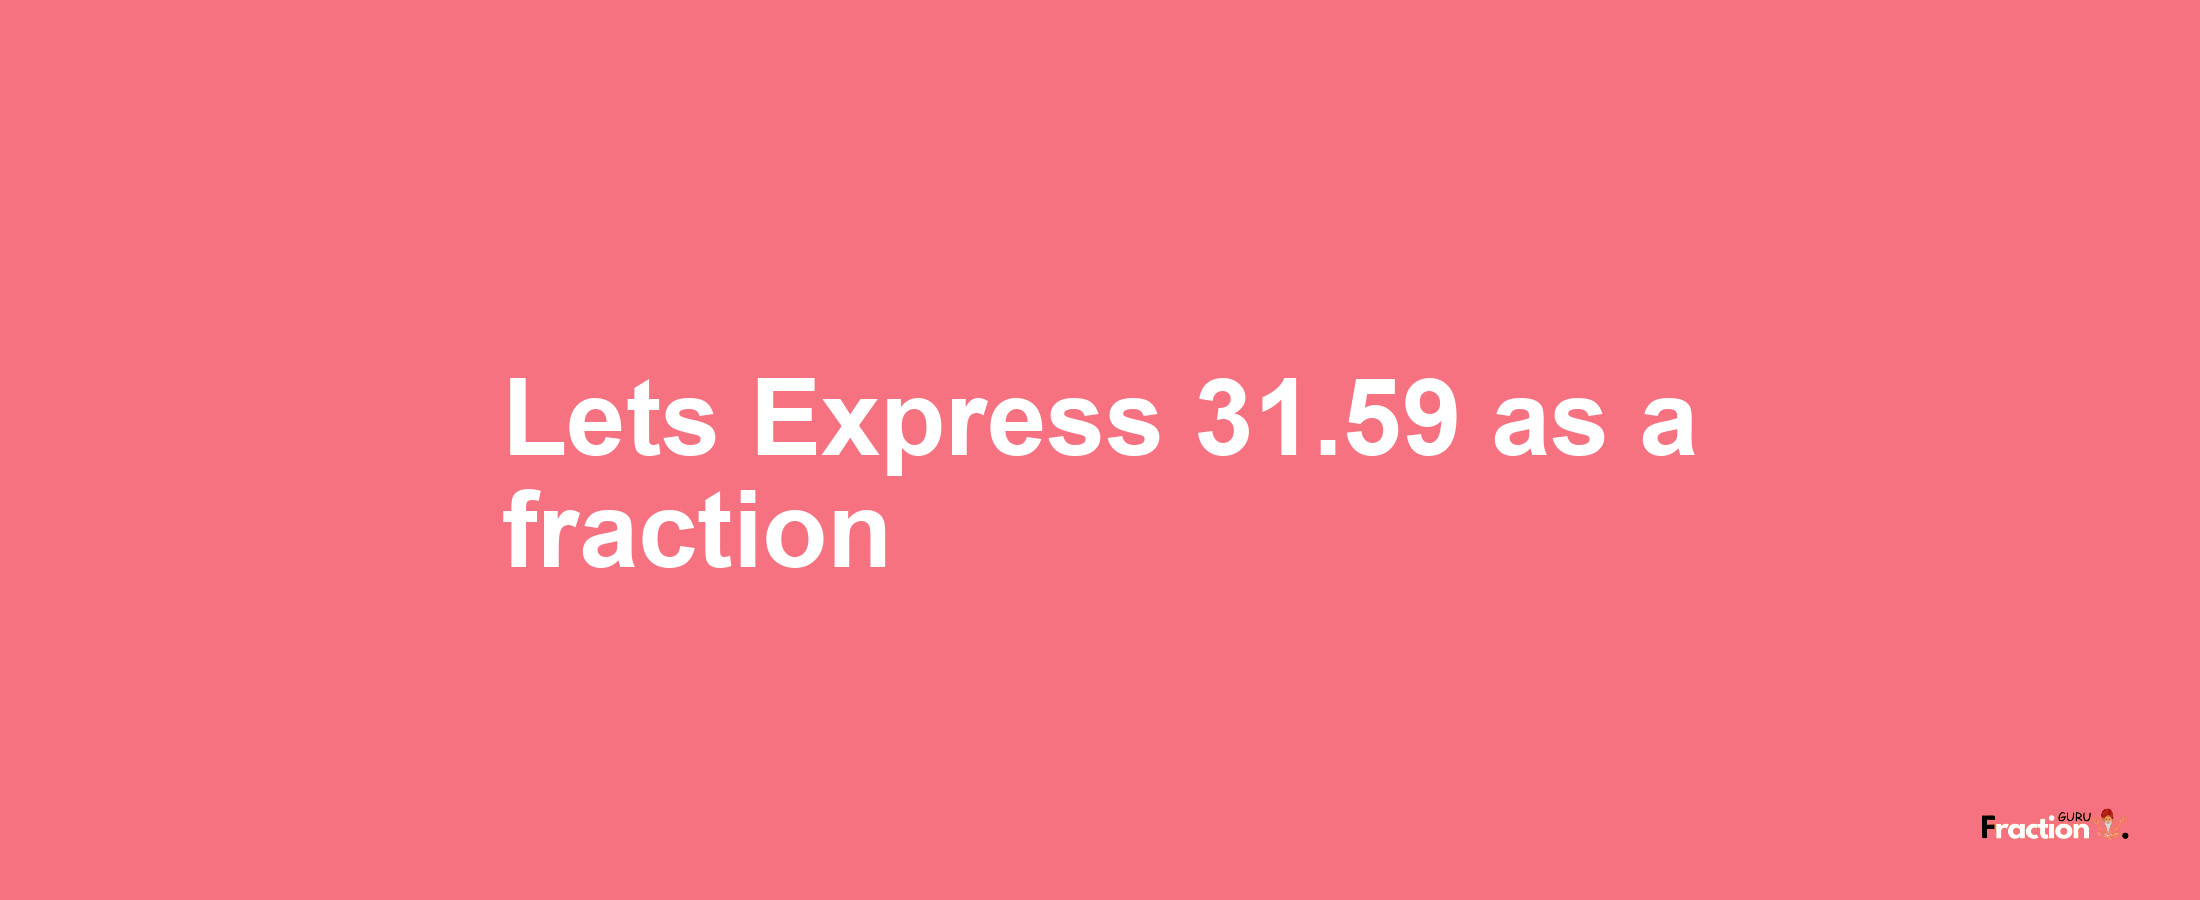 Lets Express 31.59 as afraction